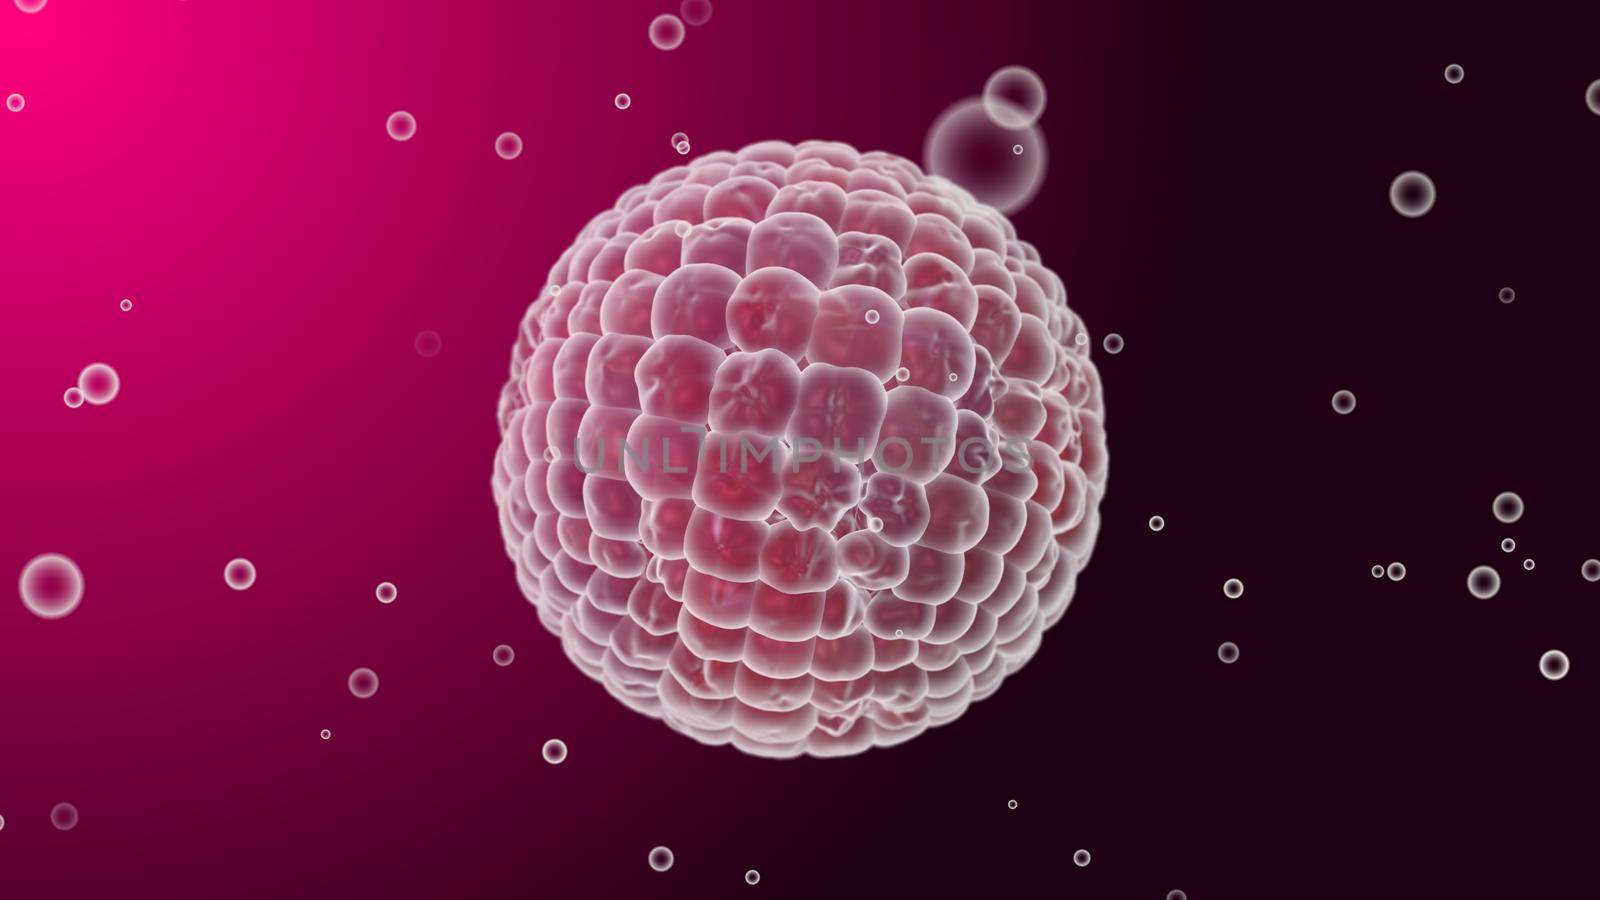 Round bacteria virus on a dark pink background with small floating bubble particles. 3D render medical illustration